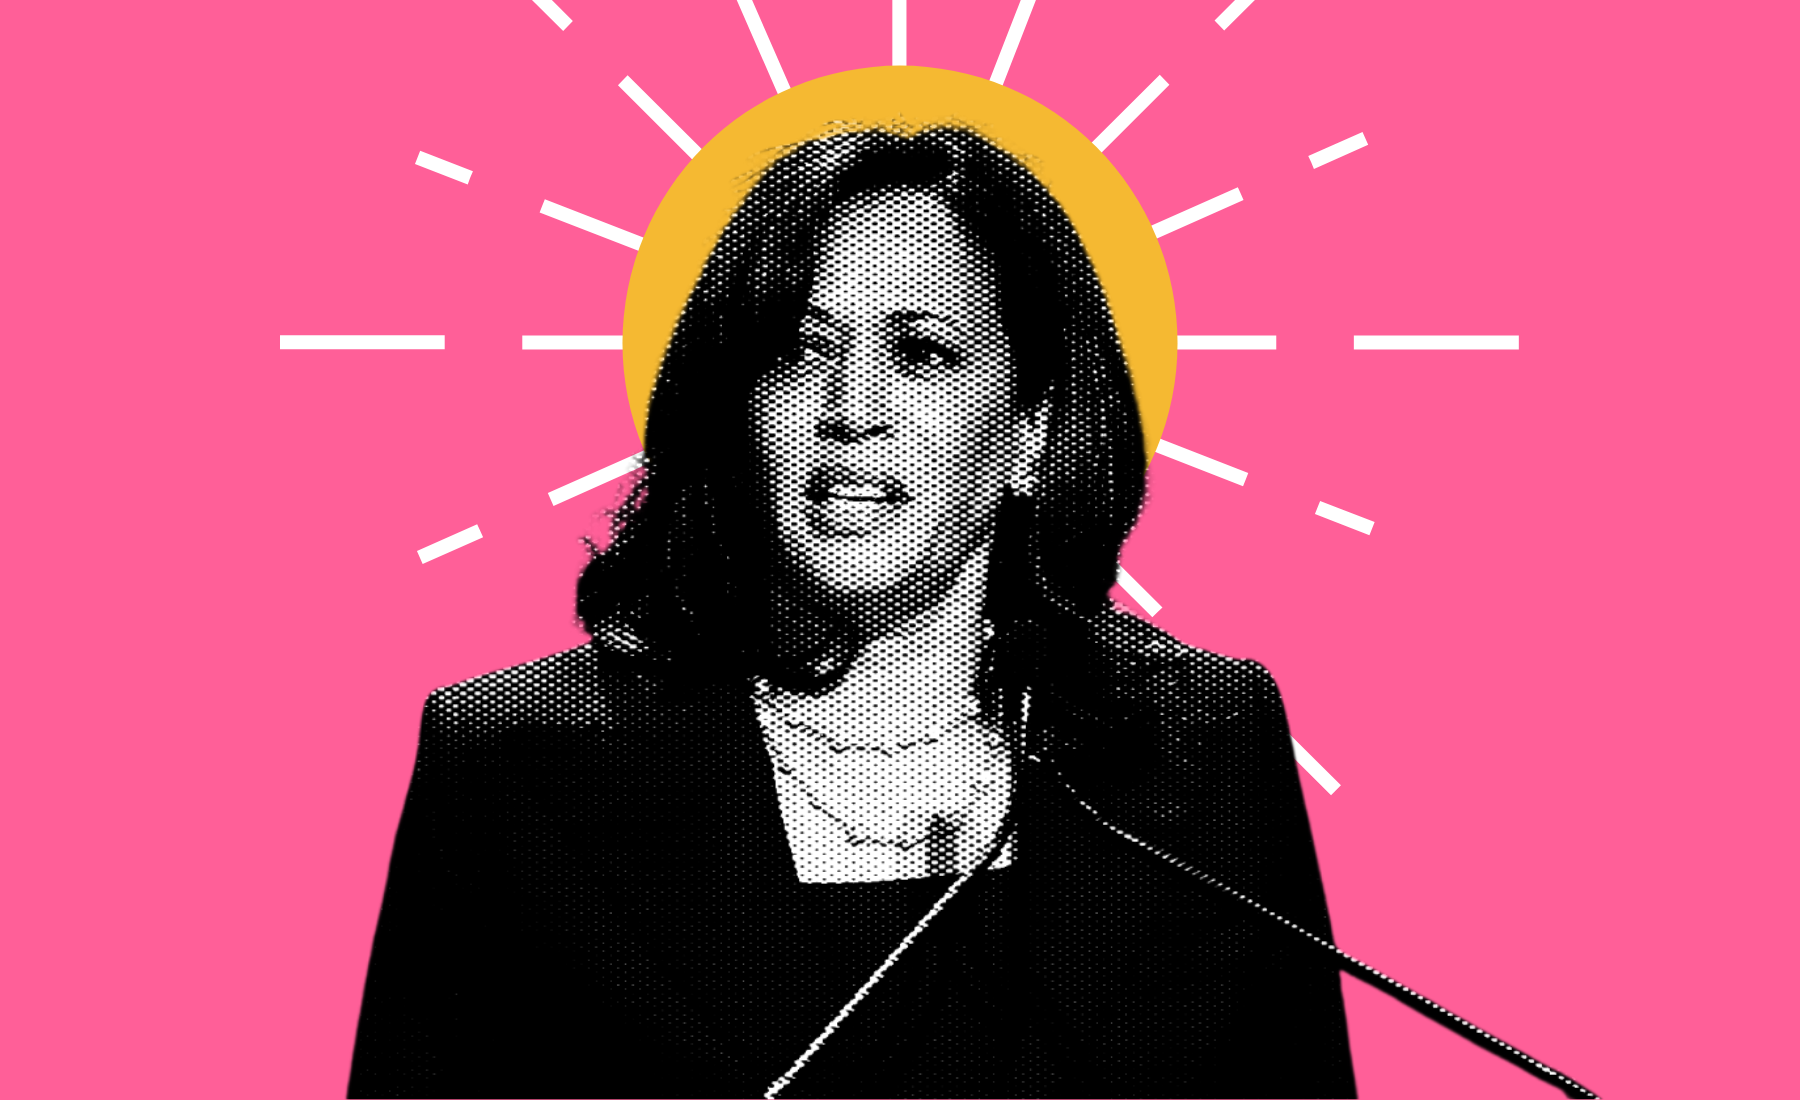 Kamala Harris’ appointment is historic but don’t ignore her problematic past